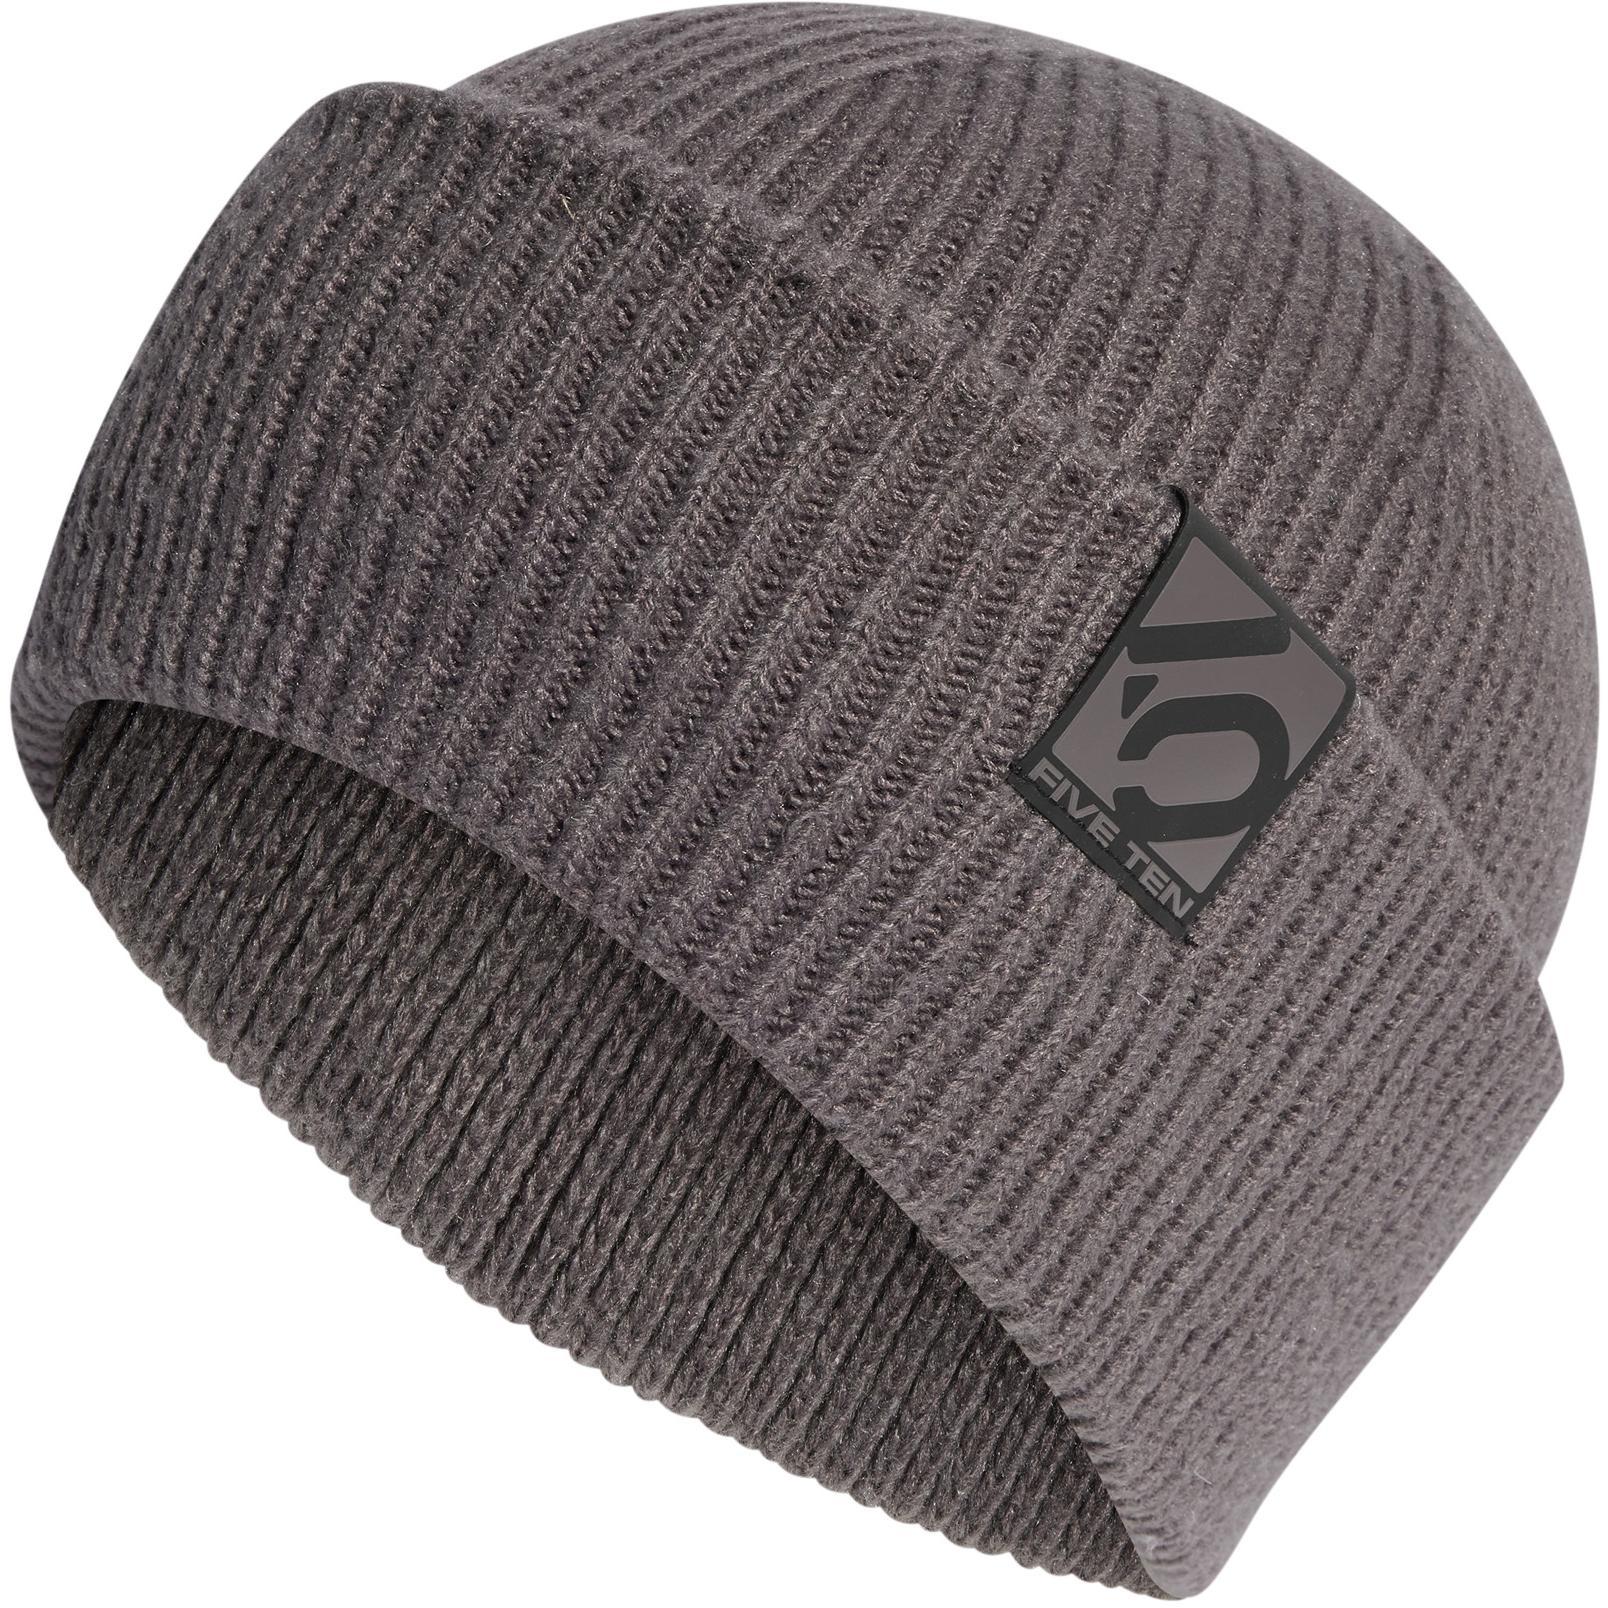 Picture of Five Ten Beanie - Charcoal / Black / White / Red